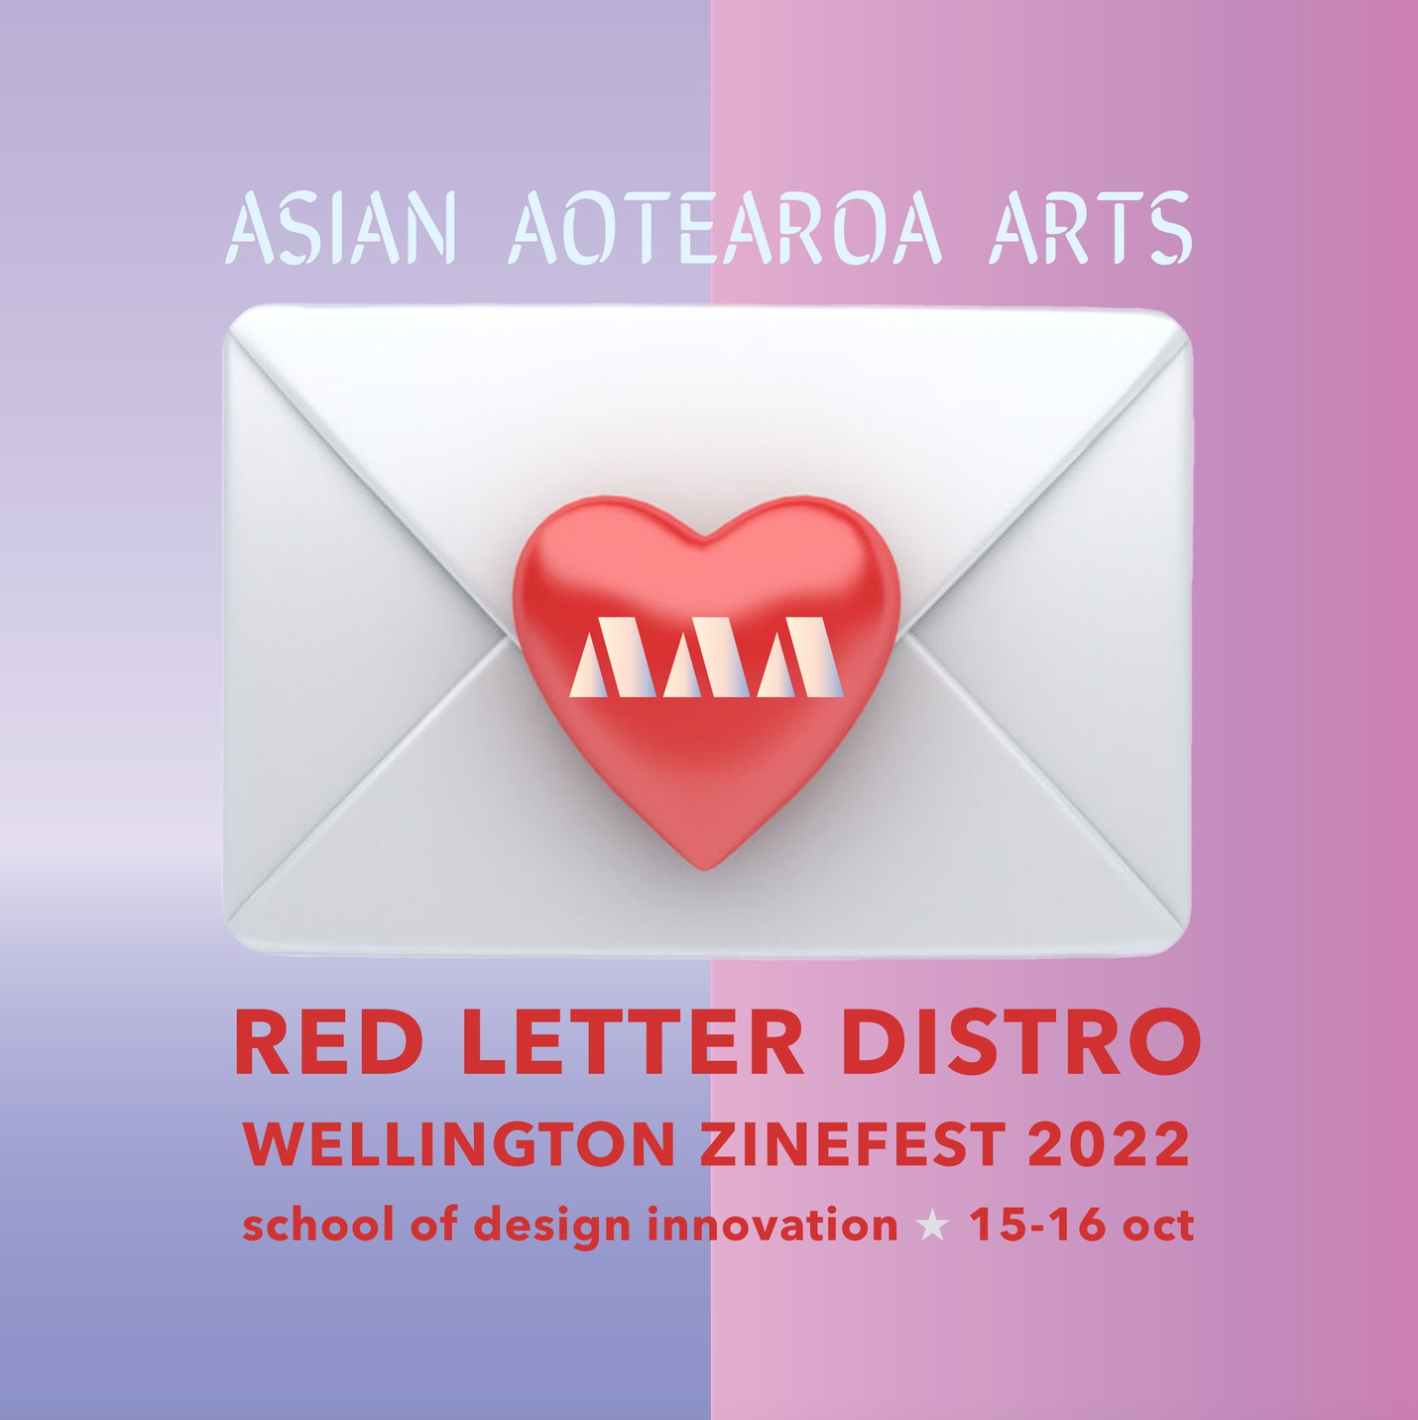 An emoji envelope on a purple and pink background with text announcing Red Letter Distro at Wellington Zinefest 2022